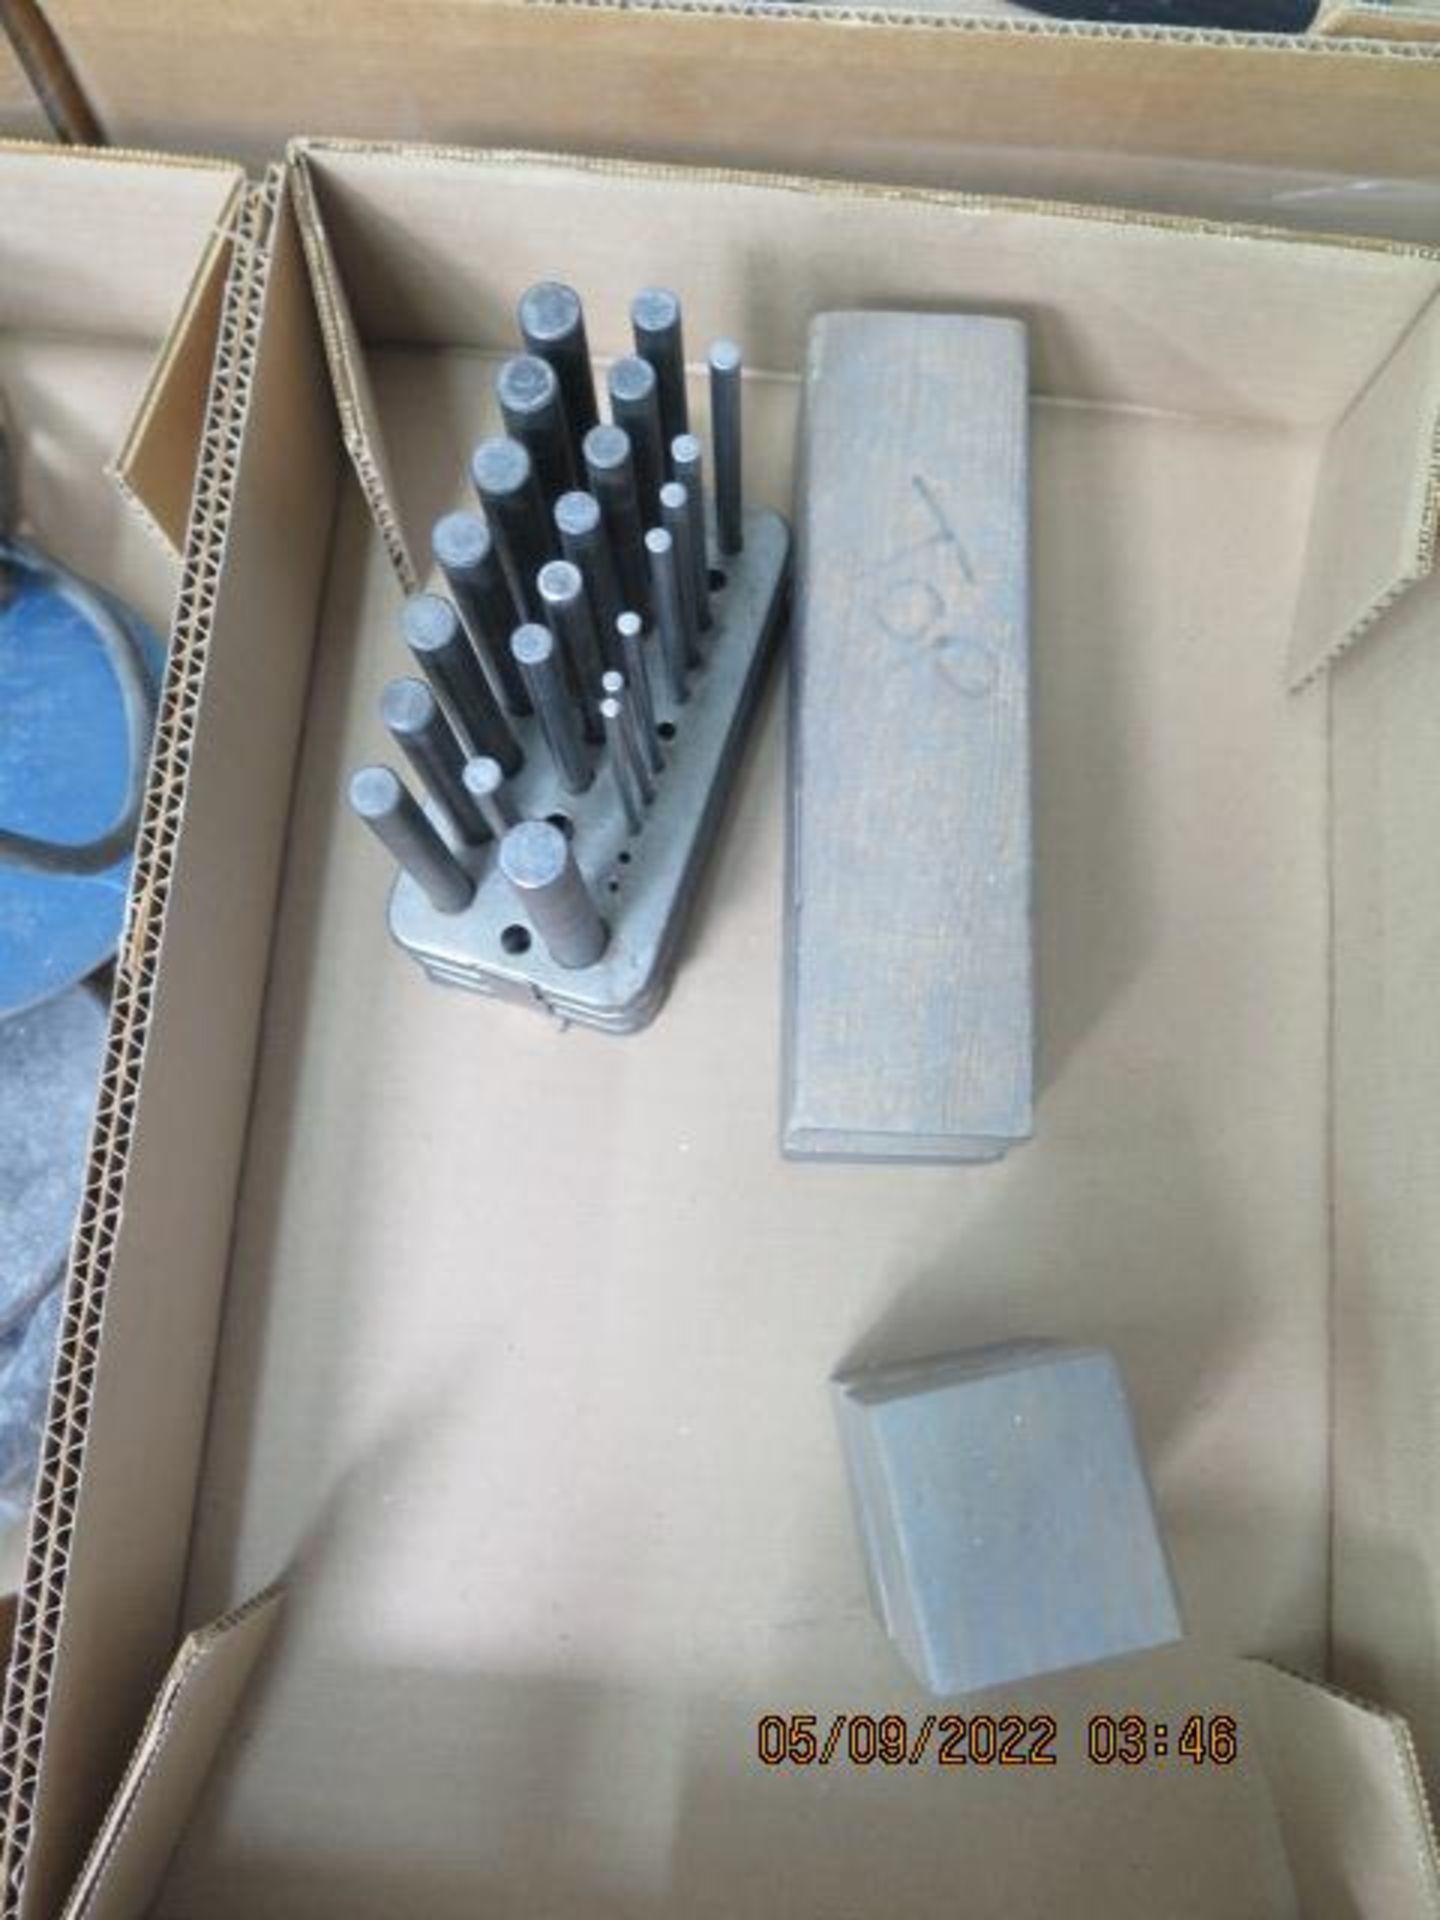 Impression Stamp Sets and Transfer Punches (SOLD AS-IS - NO WARRANTY) - Image 2 of 3